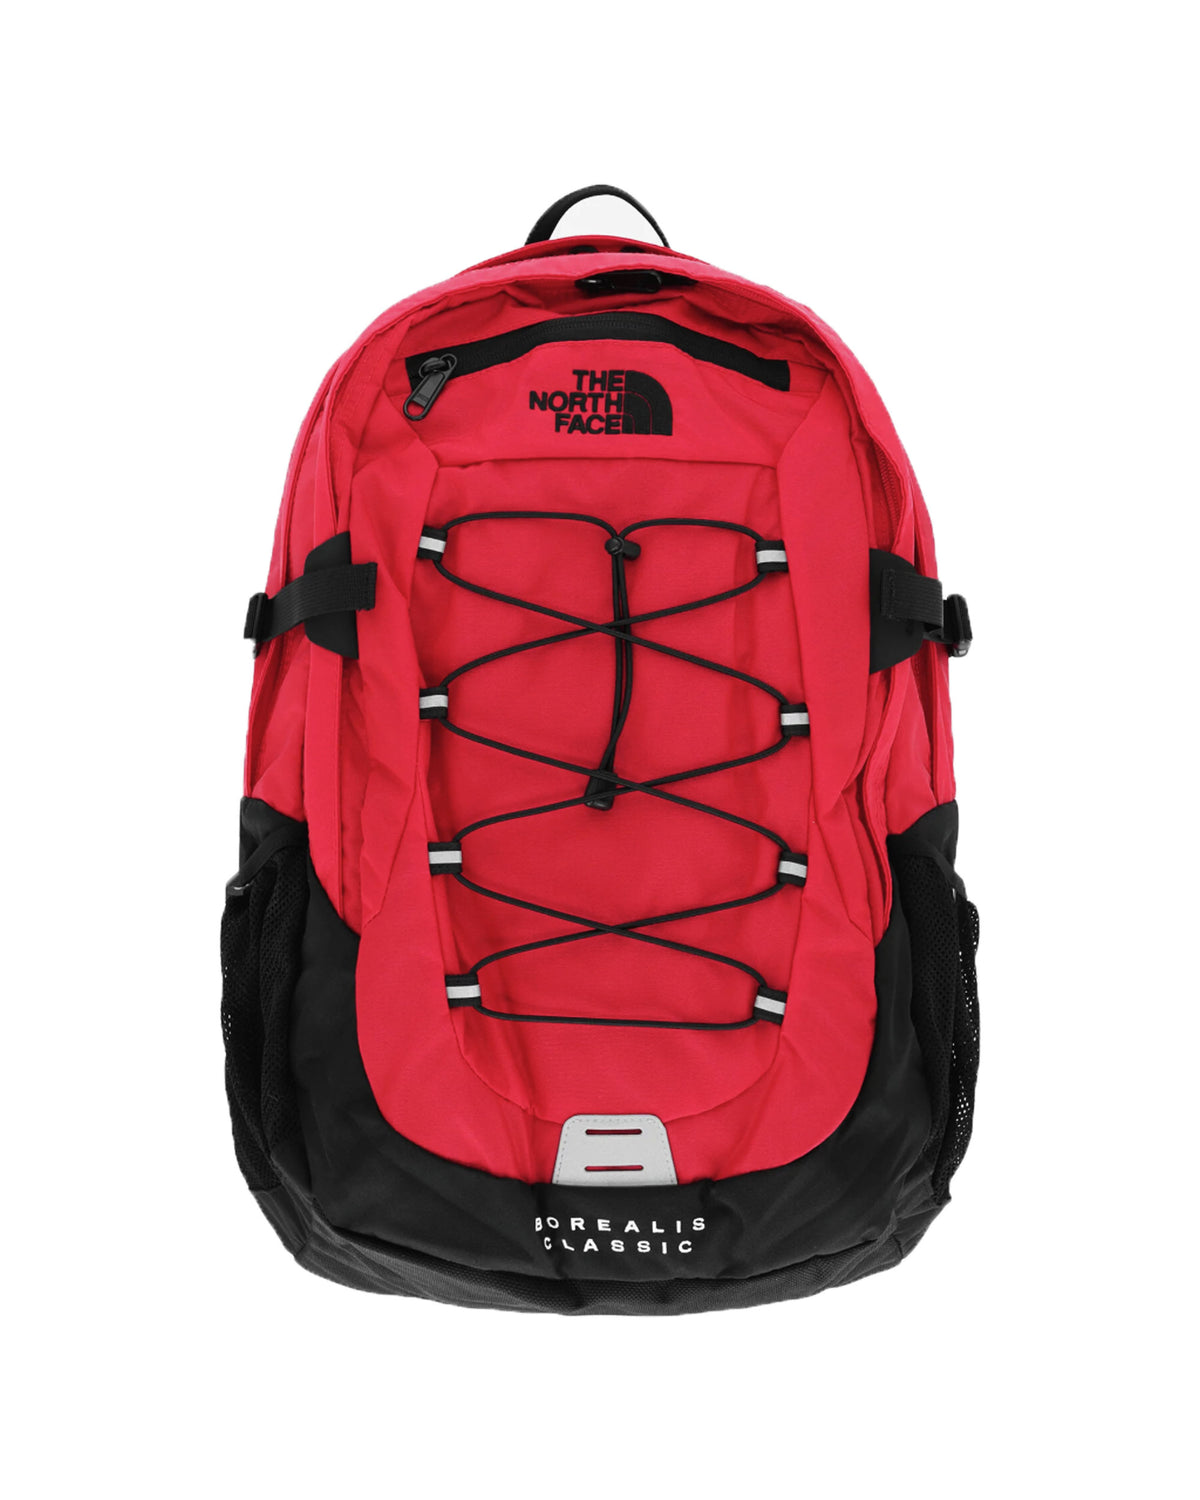 Backpack The North Face Borealis Classic Red